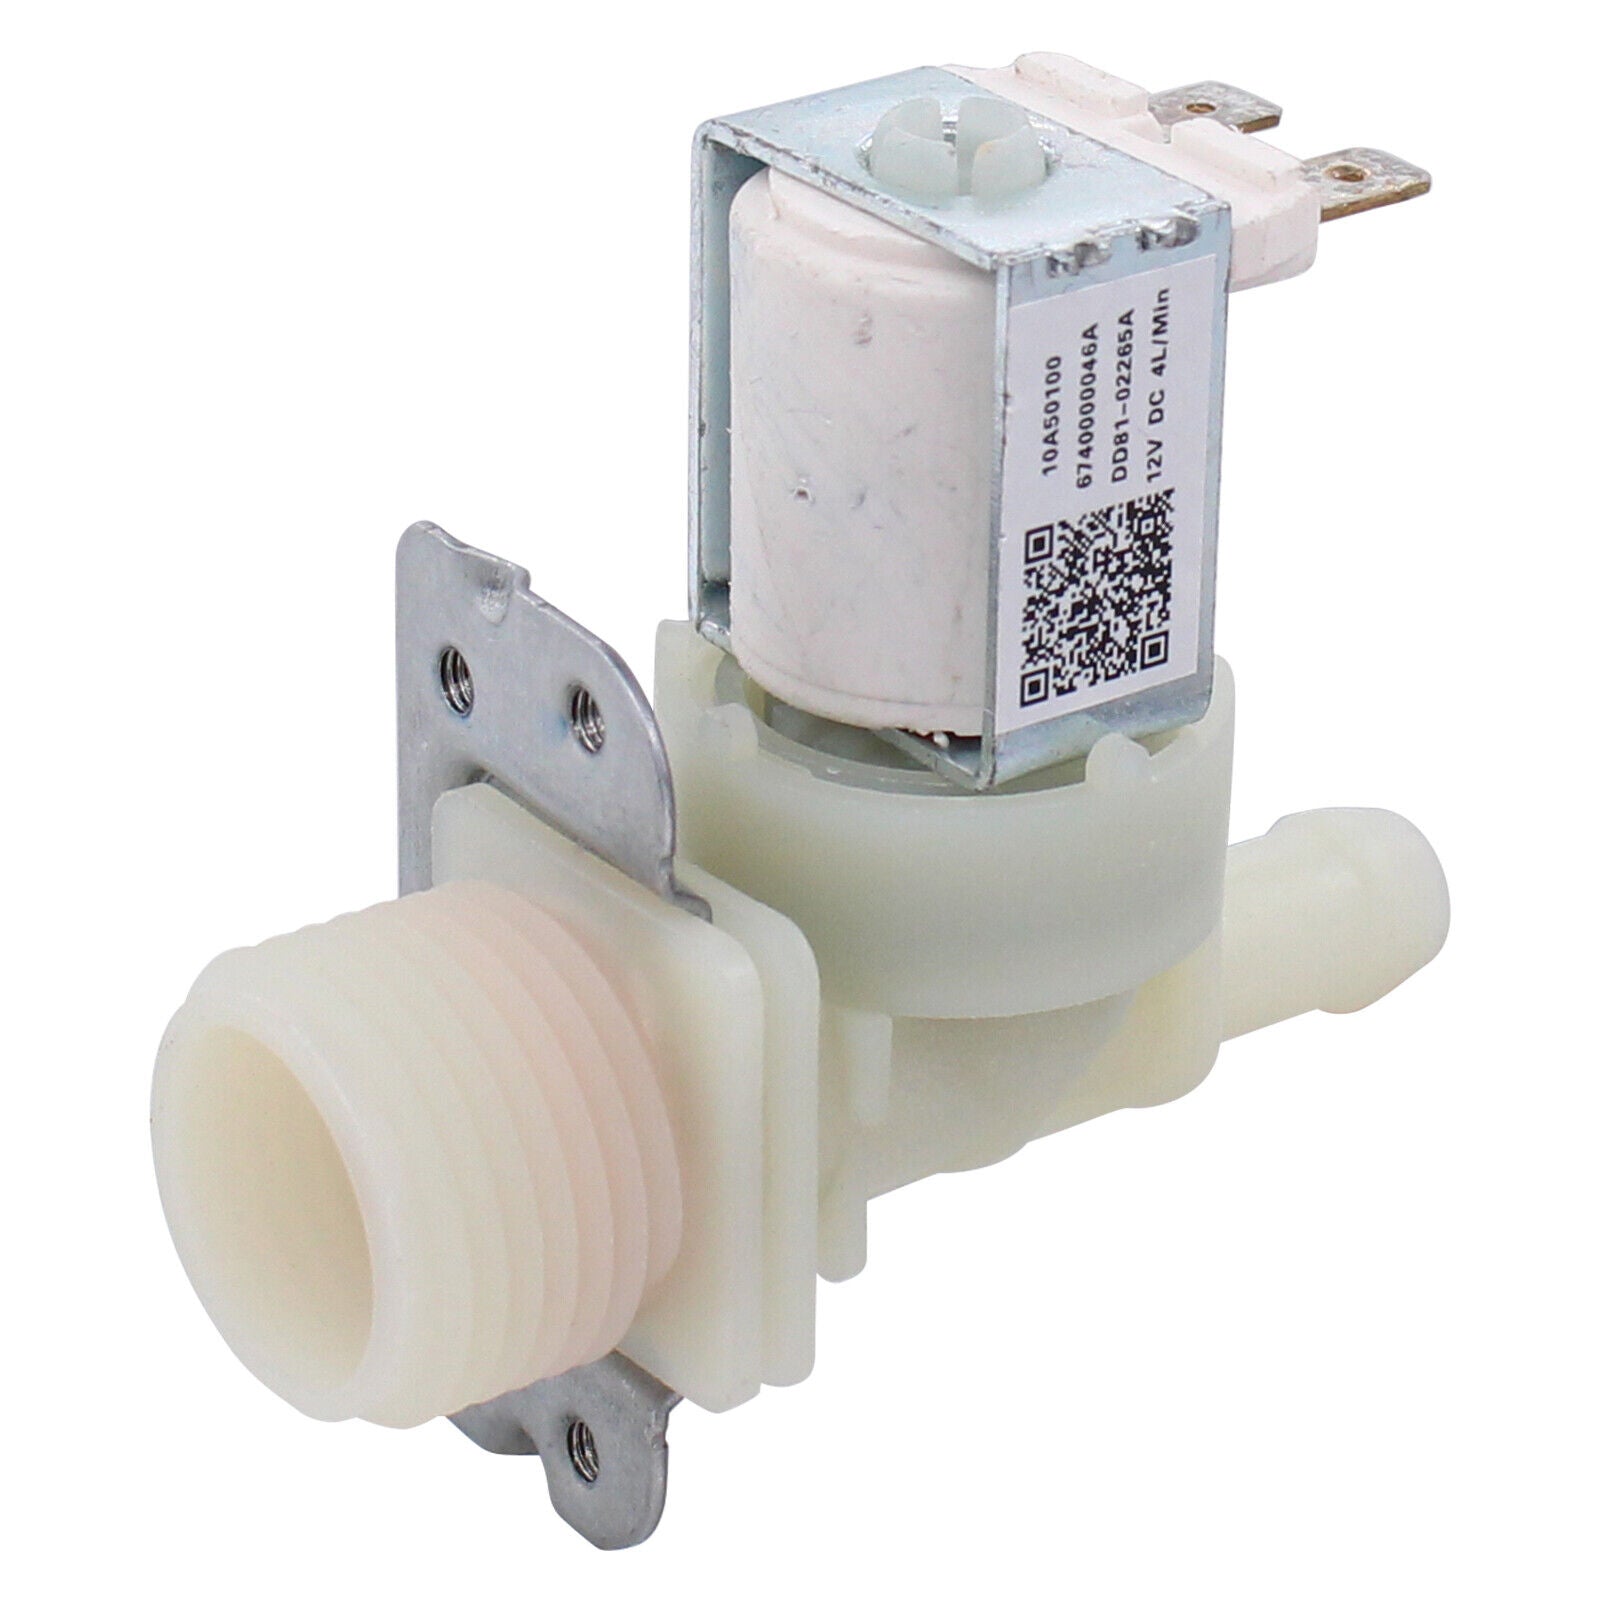 Samsung Dishwasher Water Valve 12v - DD81-02265A, Replaces: AP6244375 PS12085633 EAP12085633 PD00044305